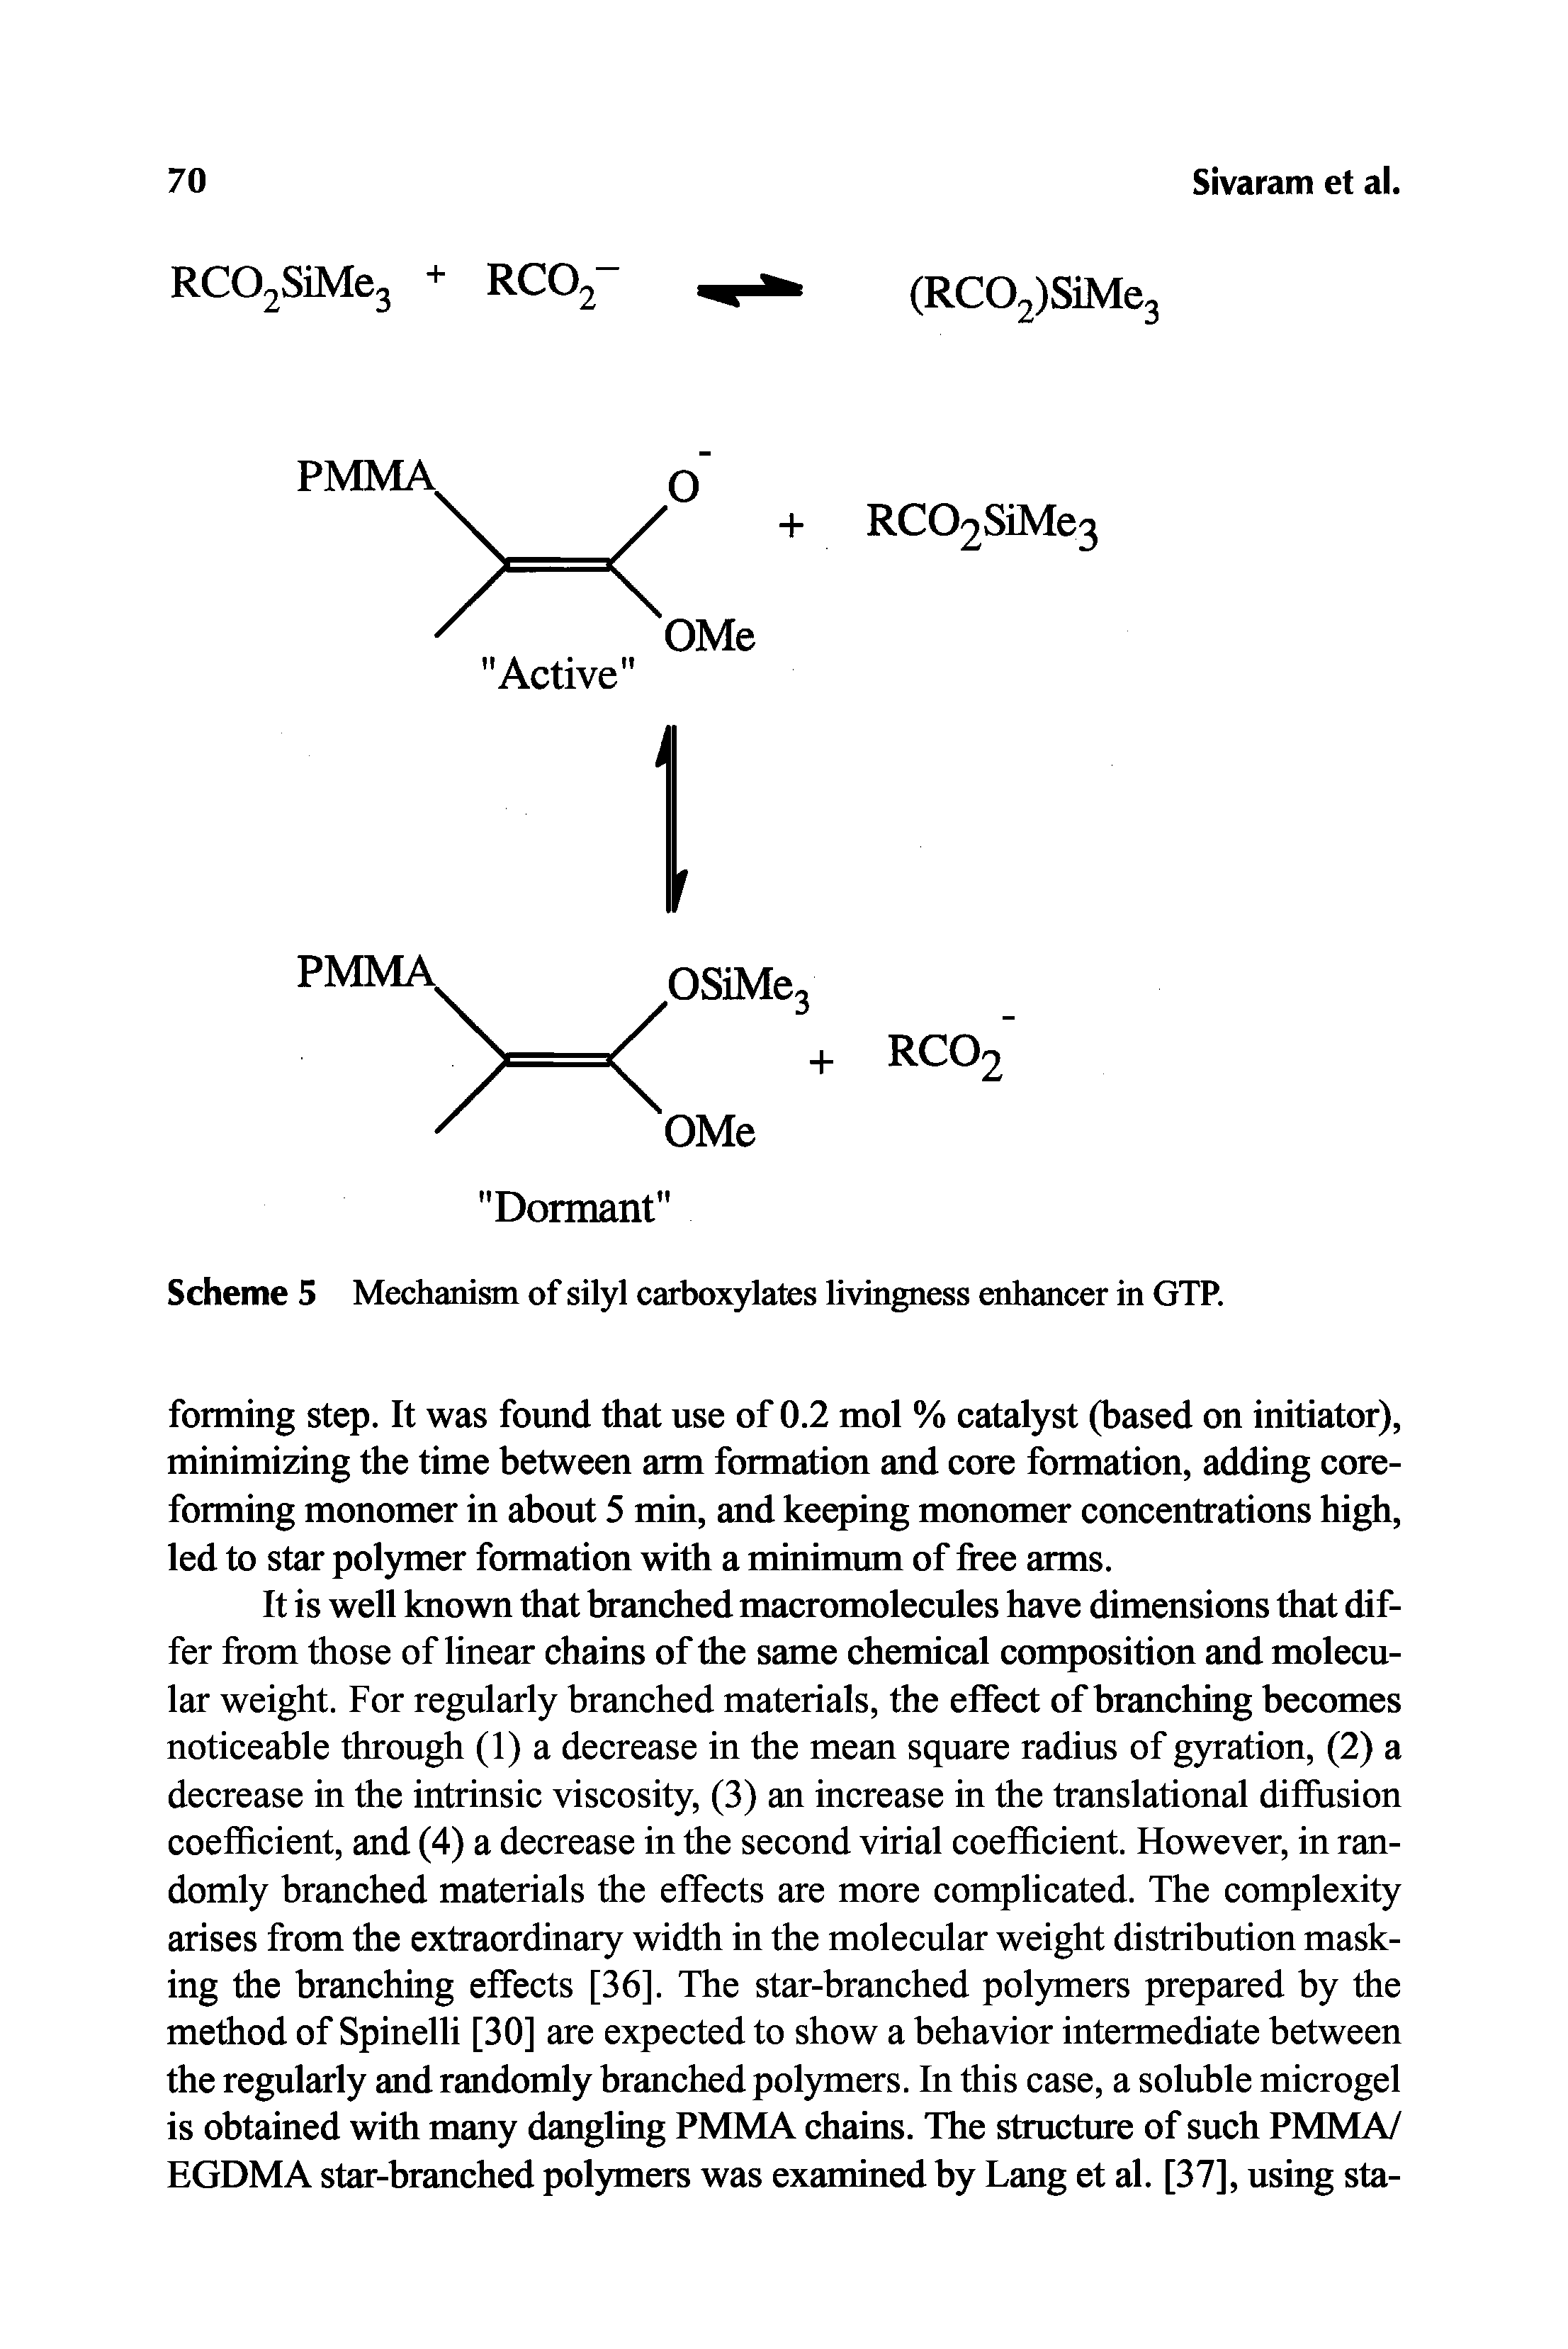 Scheme 5 Mechanism of silyl carboxylates livingness enhancer in GTP.